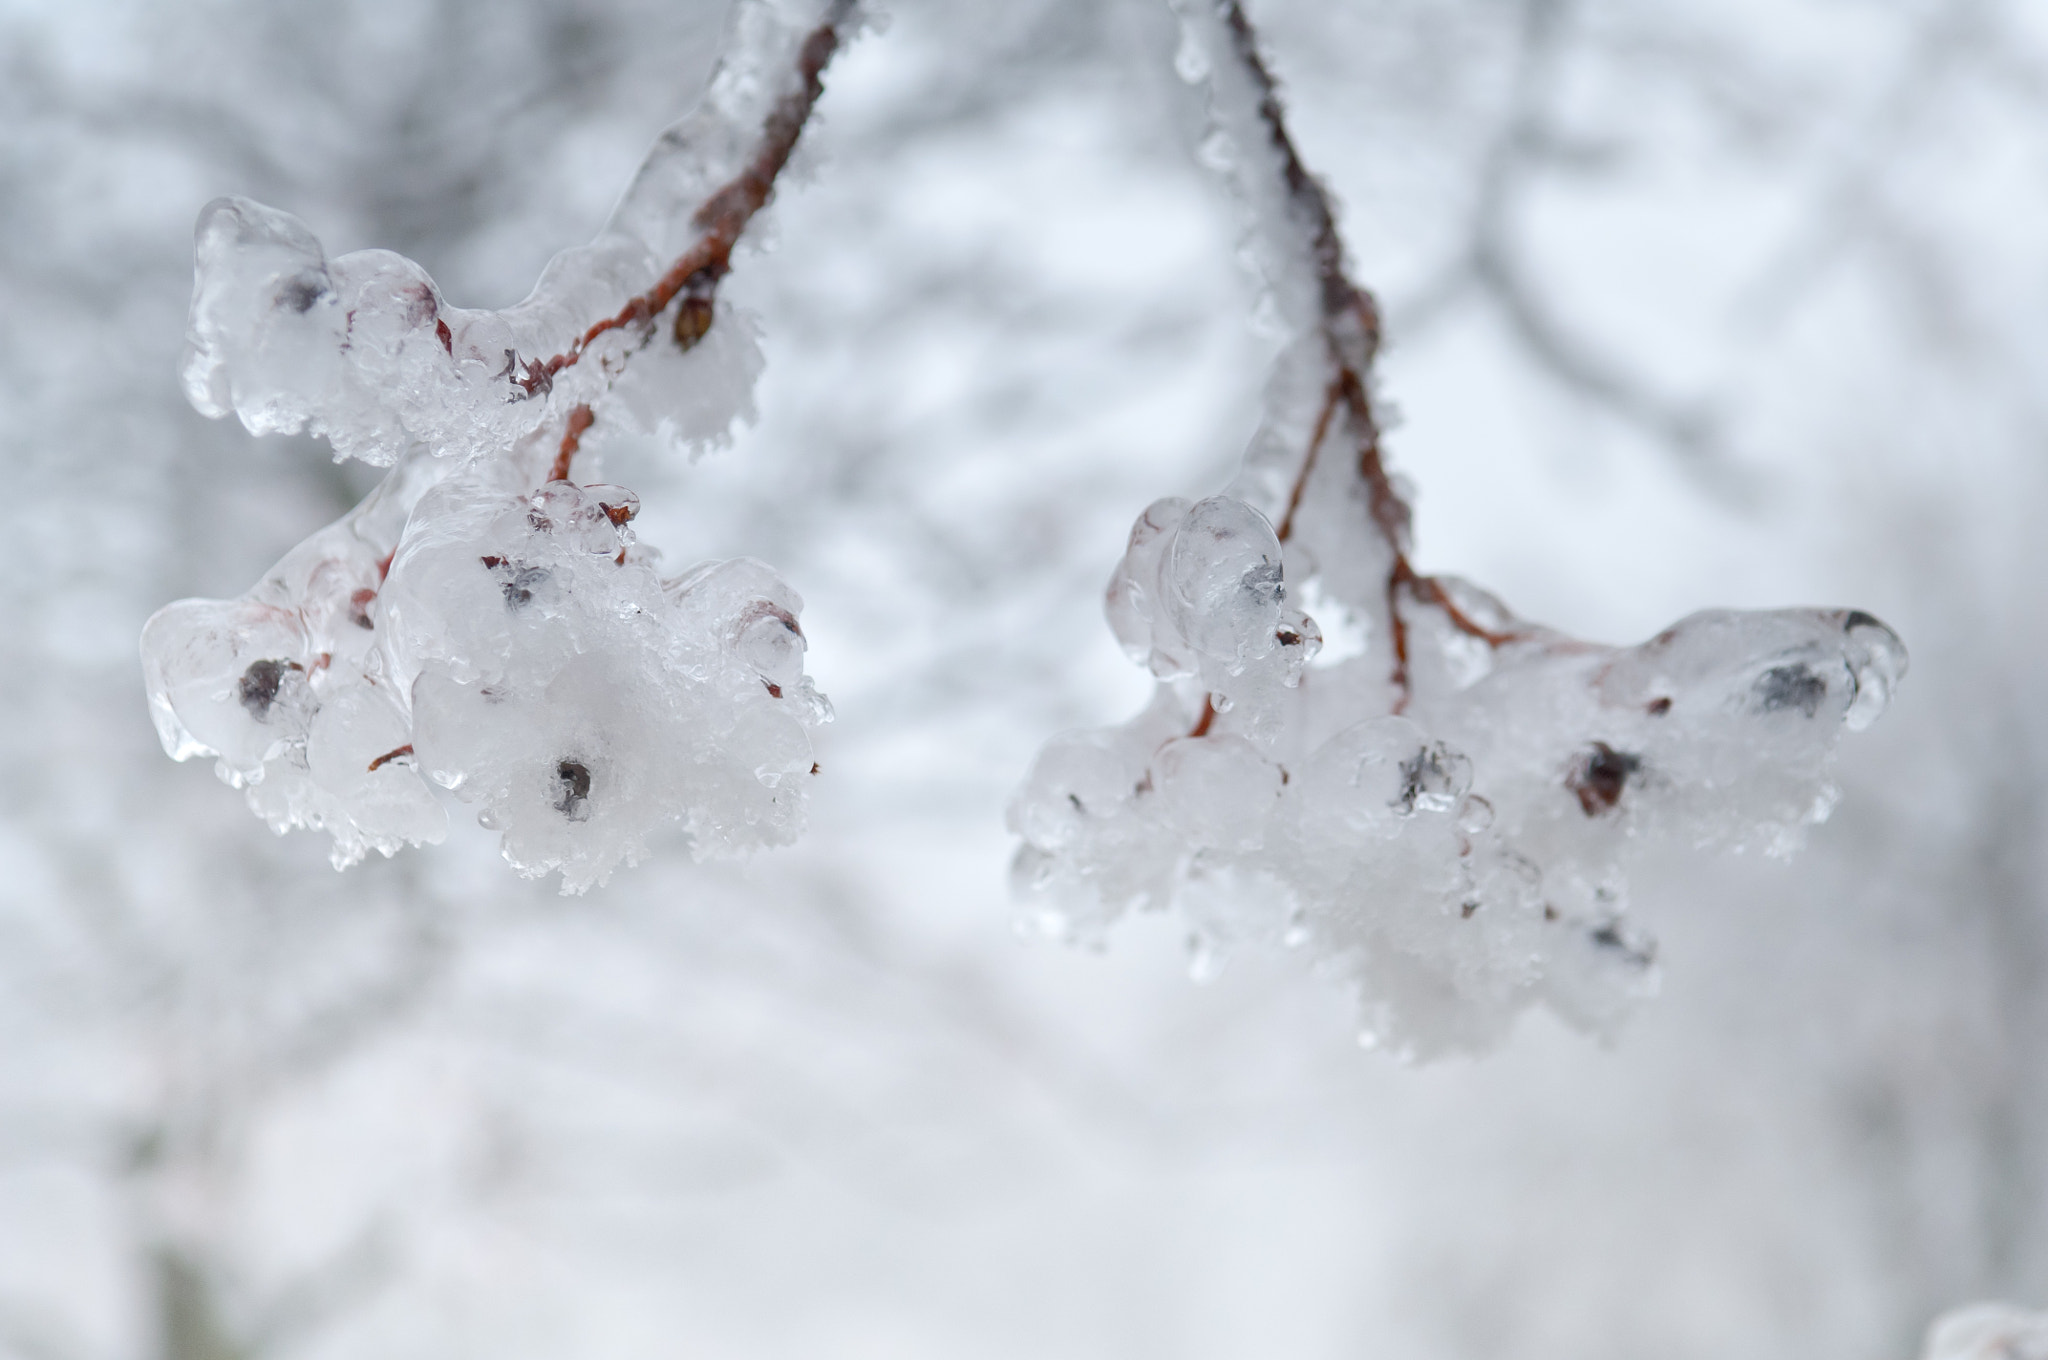 Nikon D2X sample photo. Freezing rain covered the trees and surface in a park forest photography